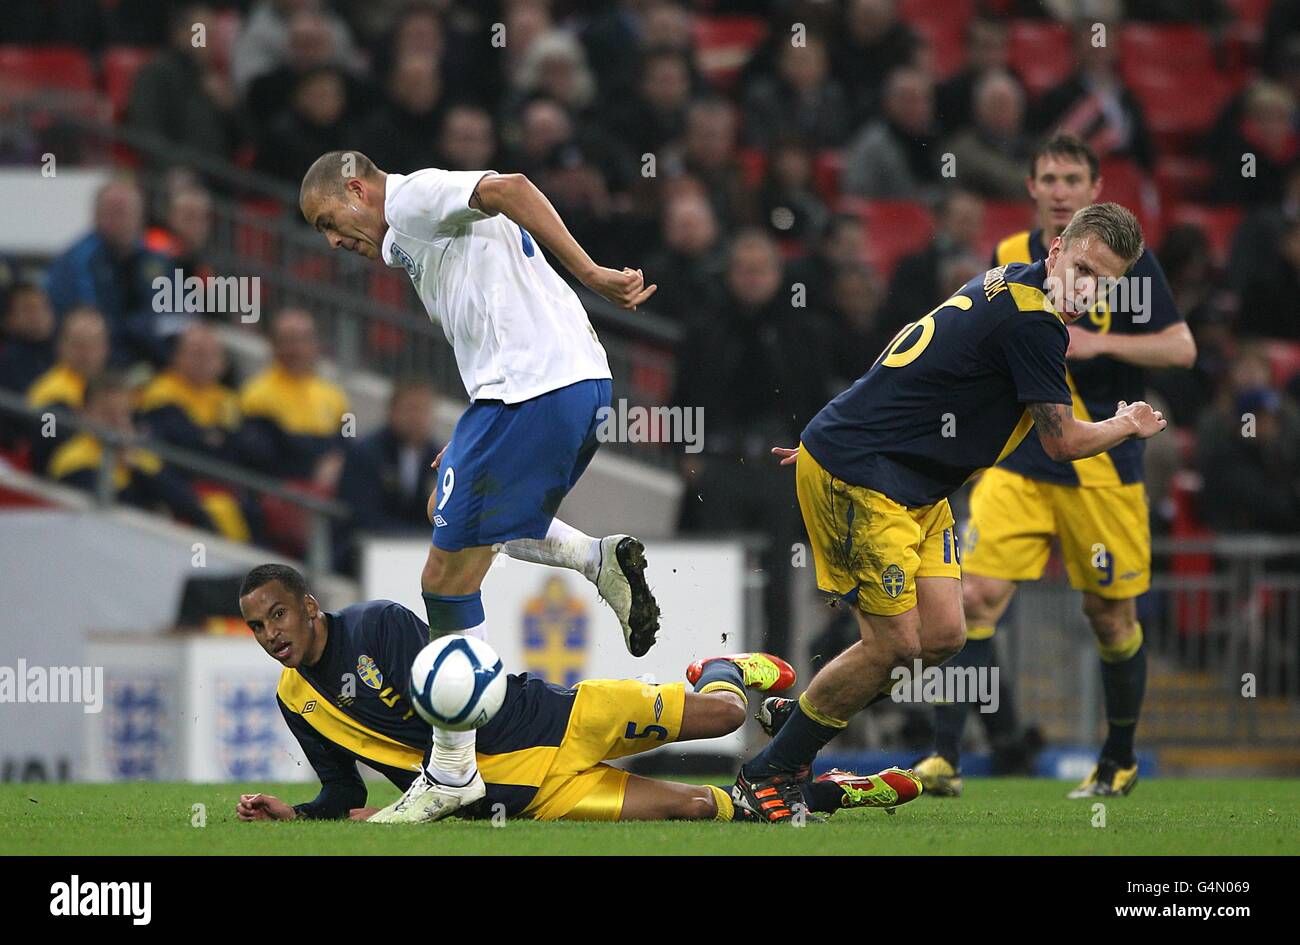 Soccer - International Friendly - England v Sweden - Wembley Stadium. England's Bobby Zamora battles for the ball with Sweden's Martin Olsson (on floor) and Pontus Wernbloom (right) Stock Photo